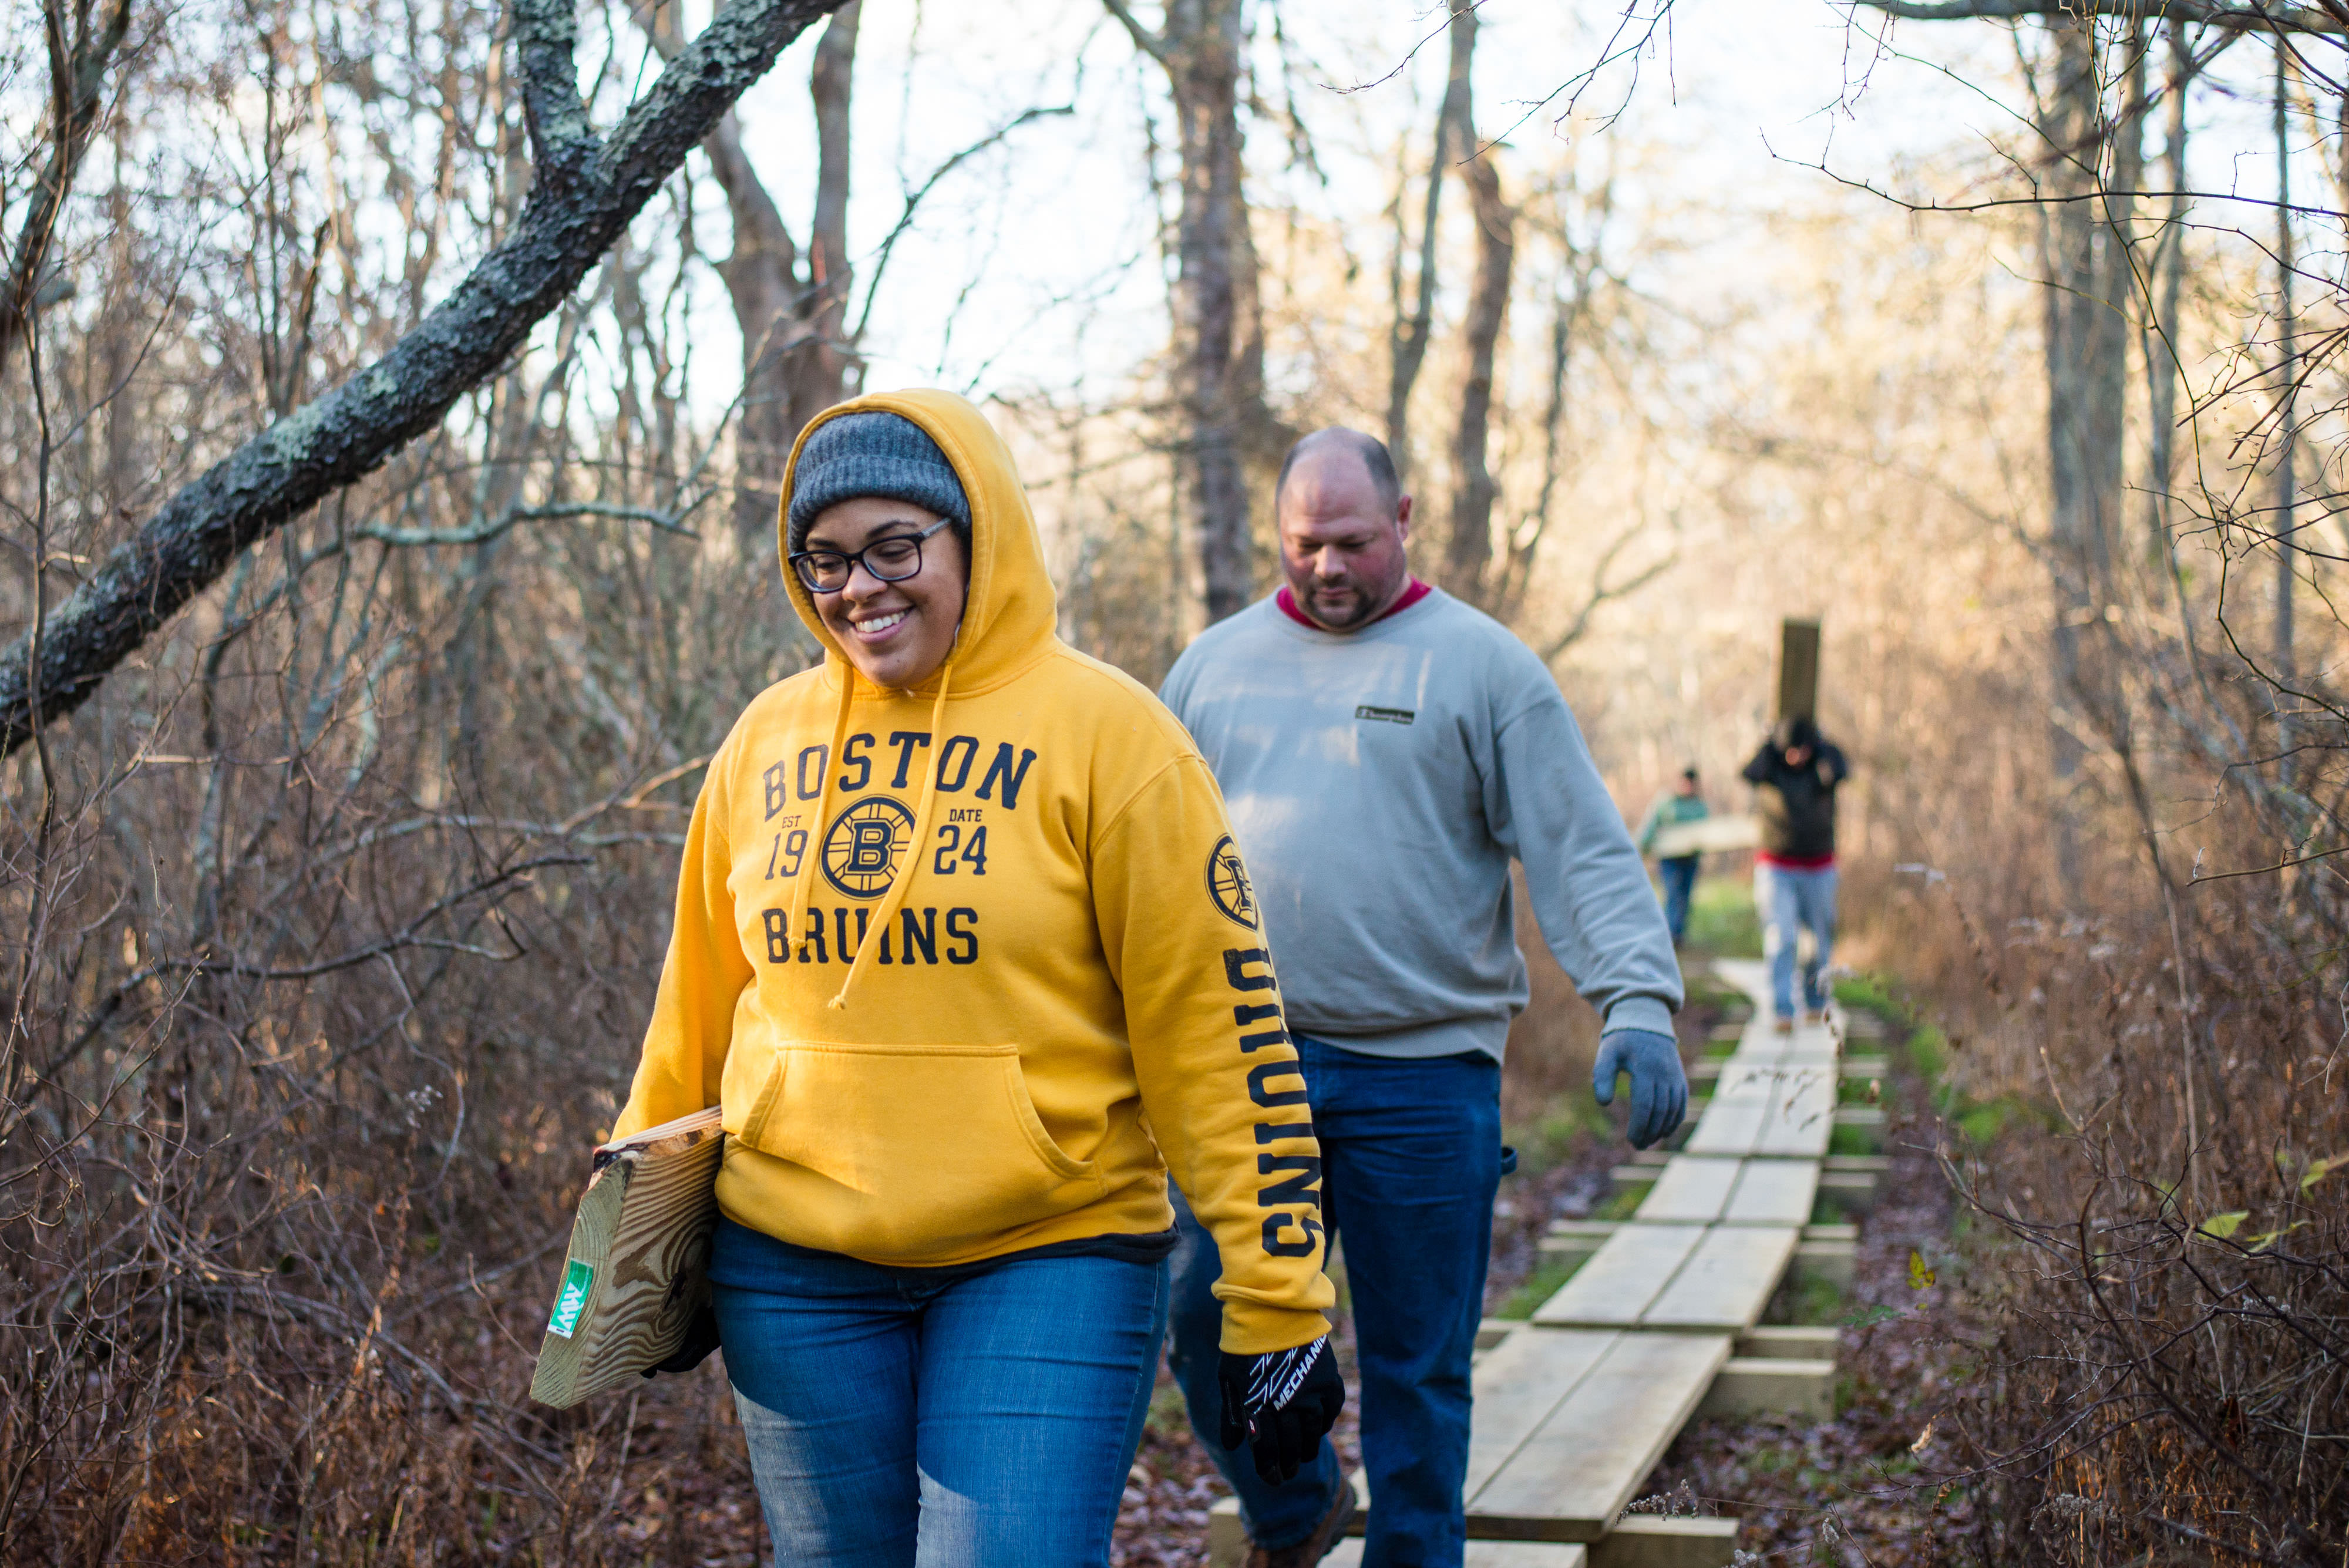 Several people walk along a boardwalk toward the camera in a wooded area.